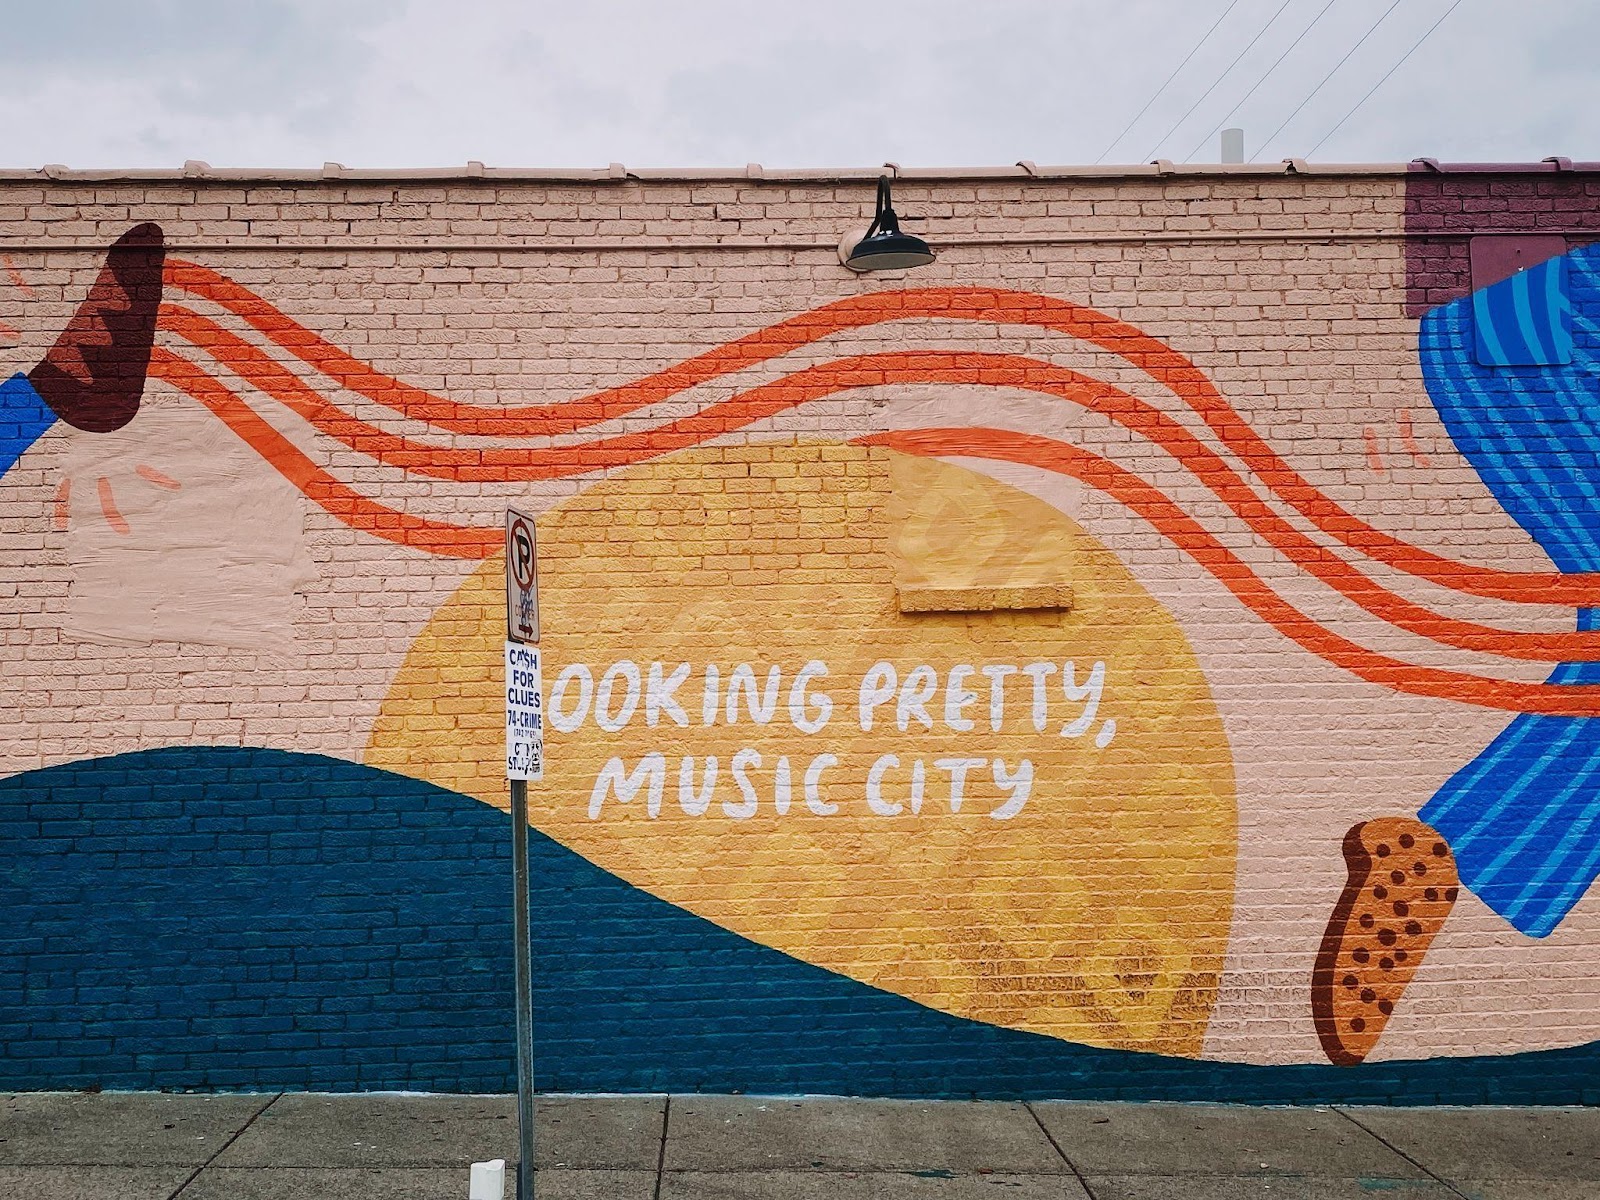  A painted wall saying ‘looking pretty, Music City’ in Nashville.